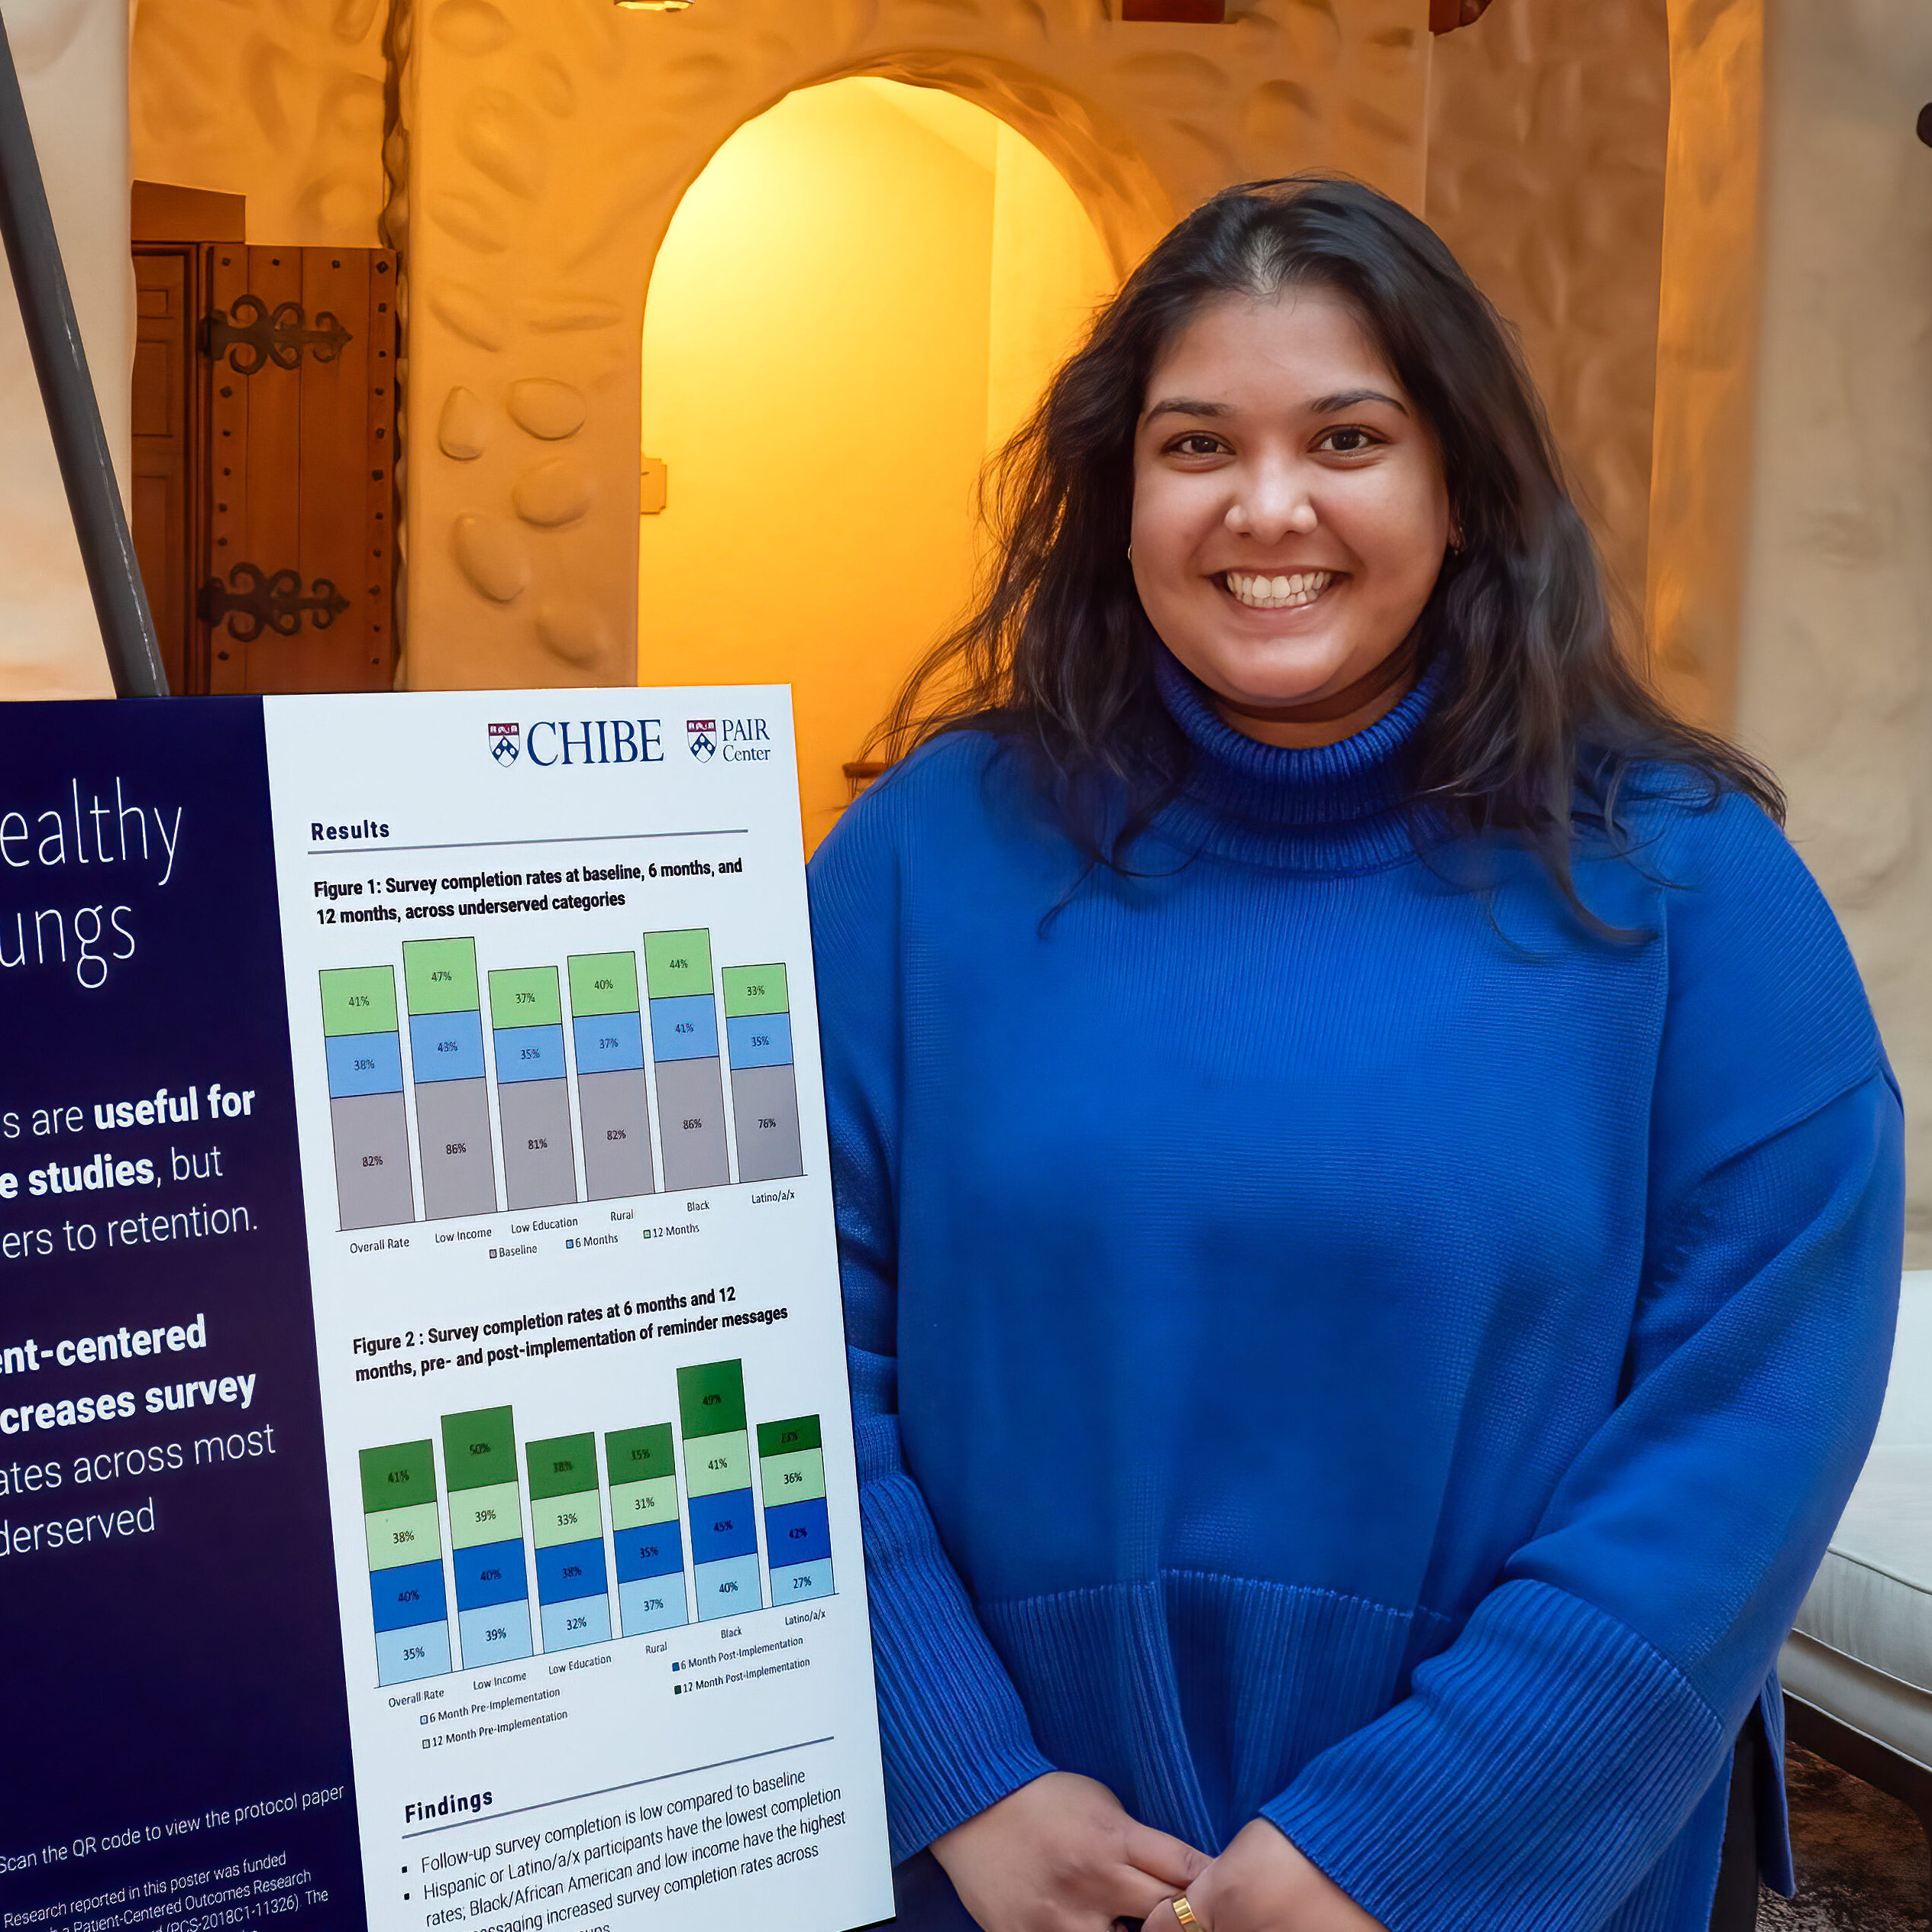 Staff Nirali Patel standing next to a poster on the Healthy Lungs program at the Roybal Retreat 2023 Poster Session.